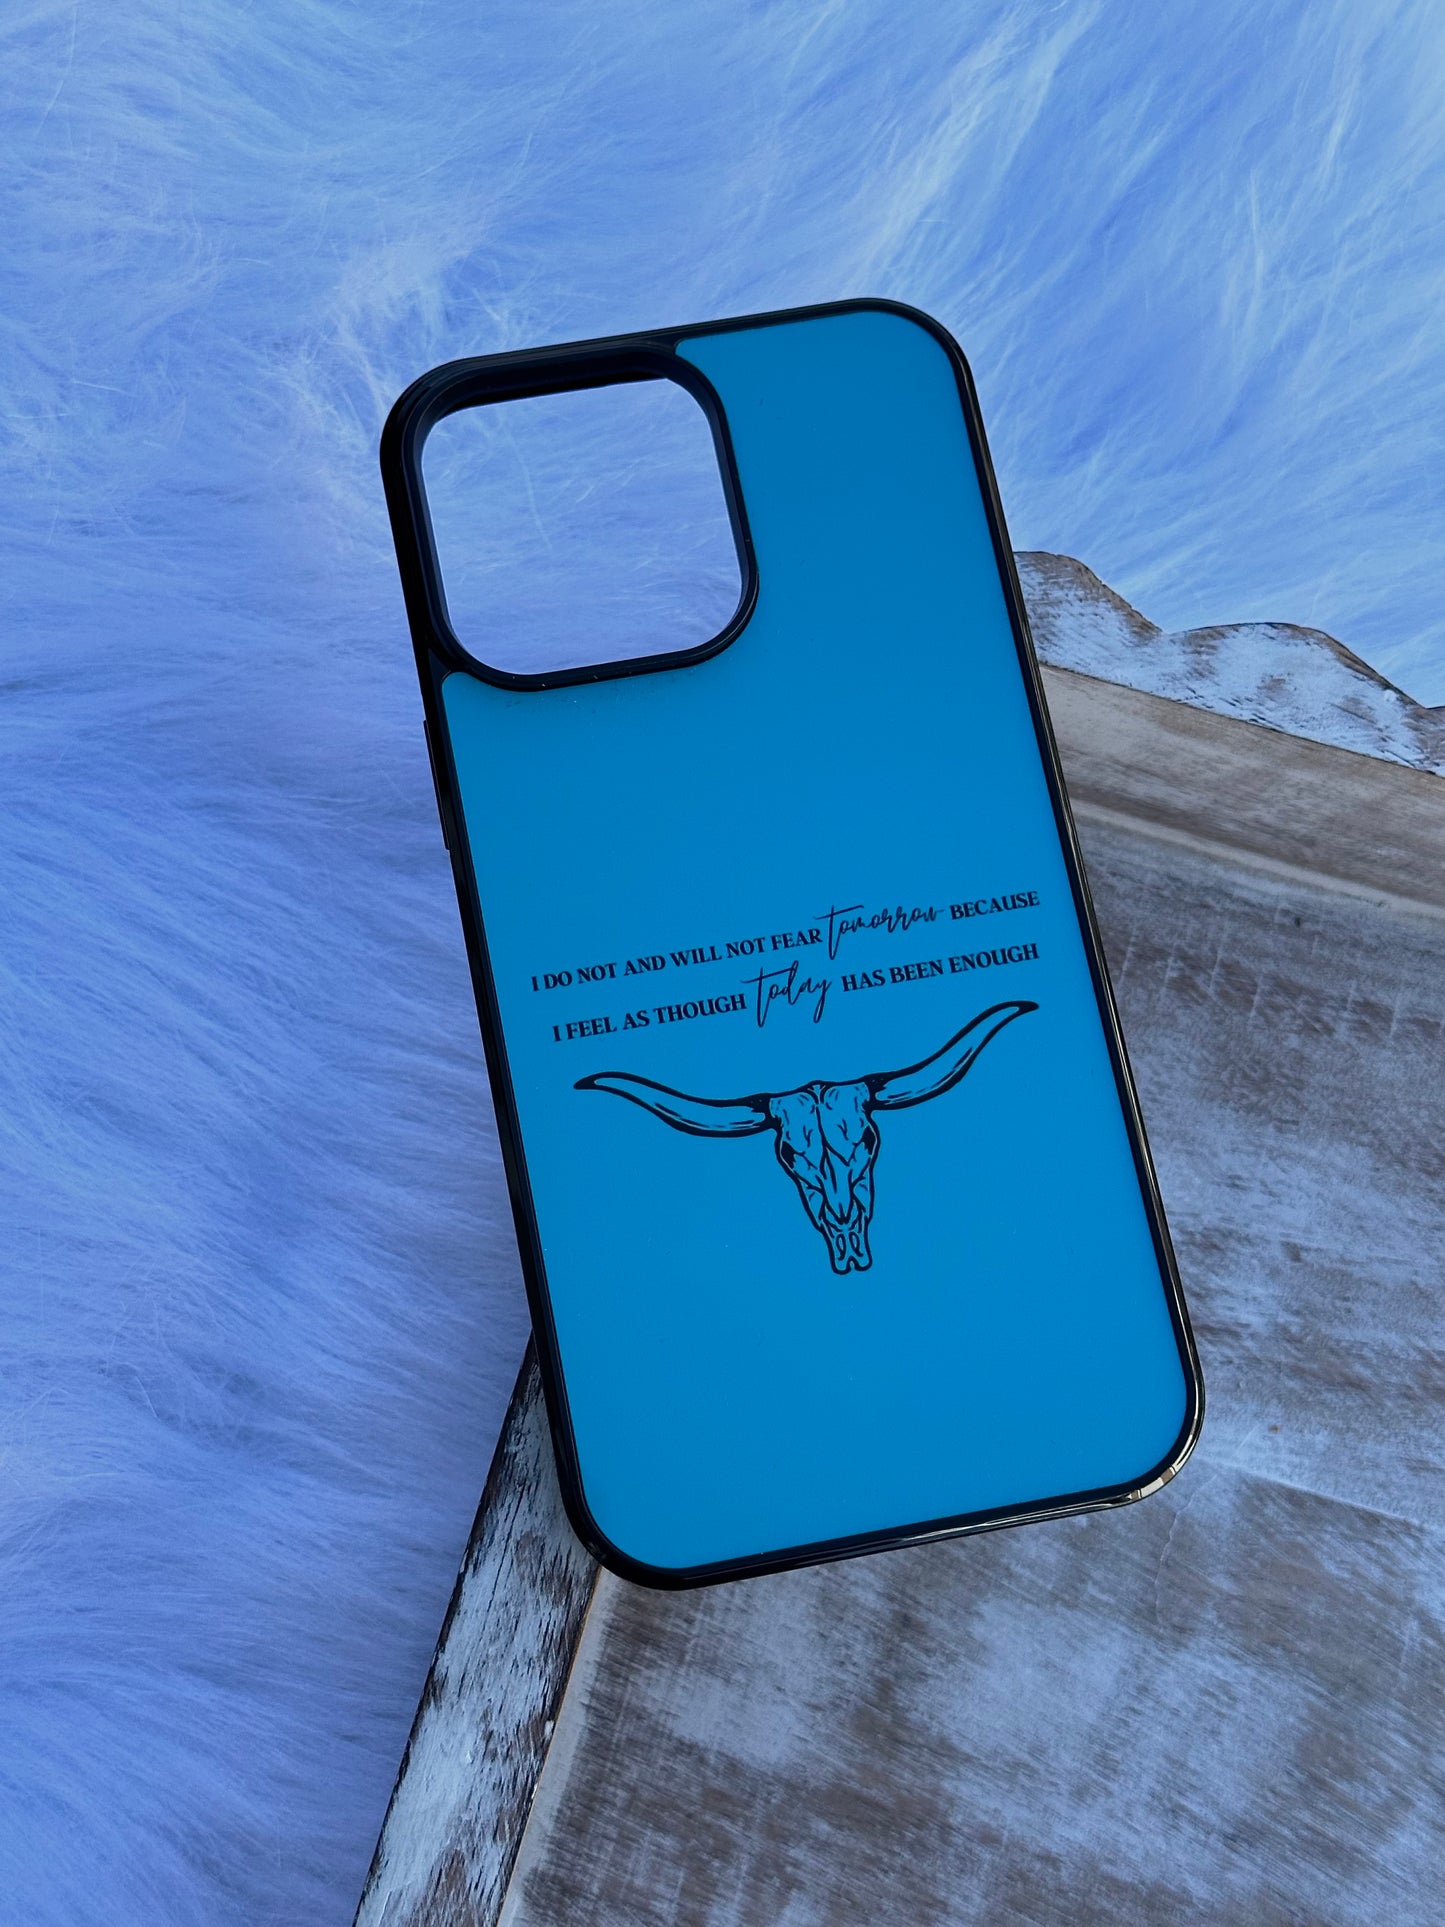 Turquoise FT phone case